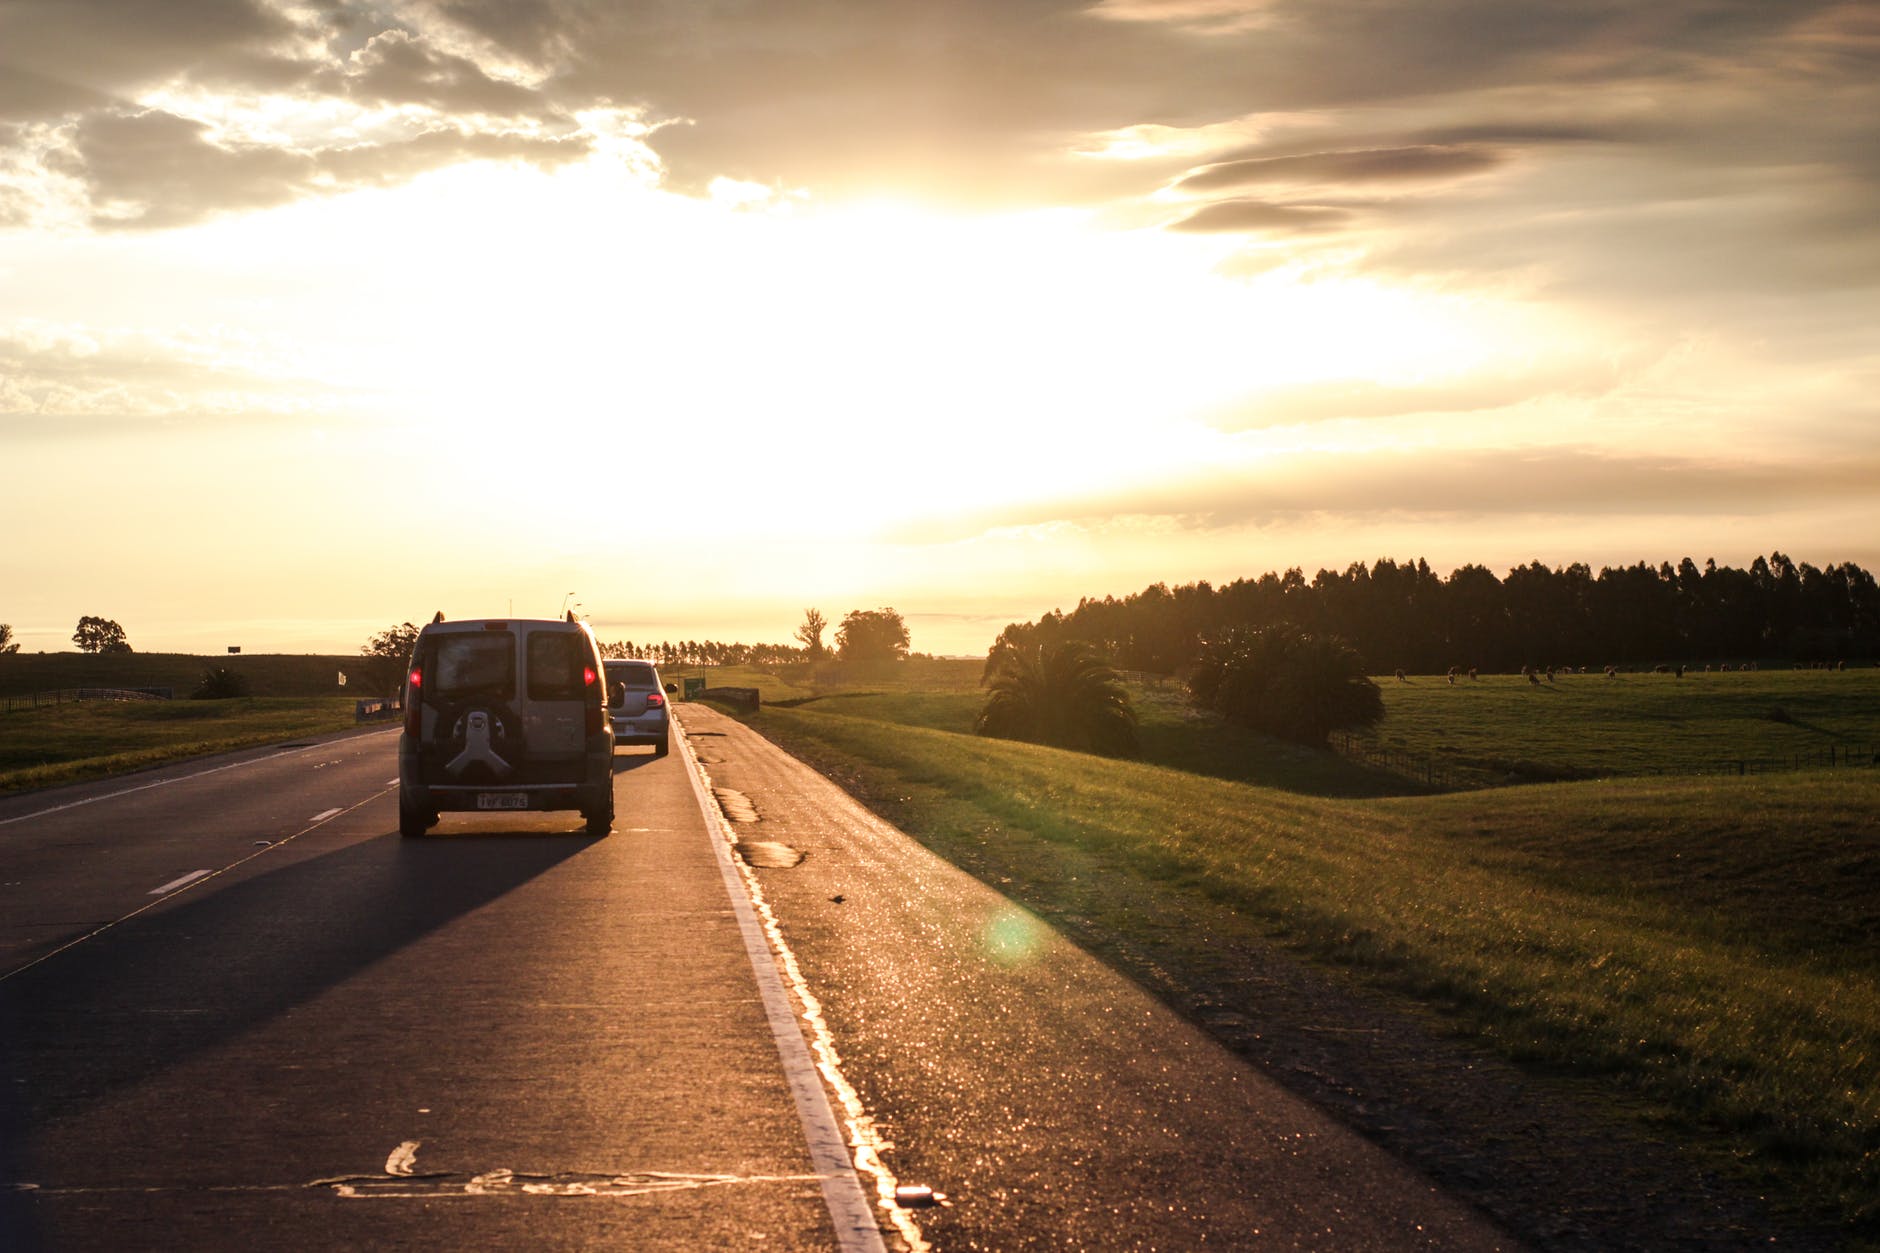 photo of vehicles on road during golden hour